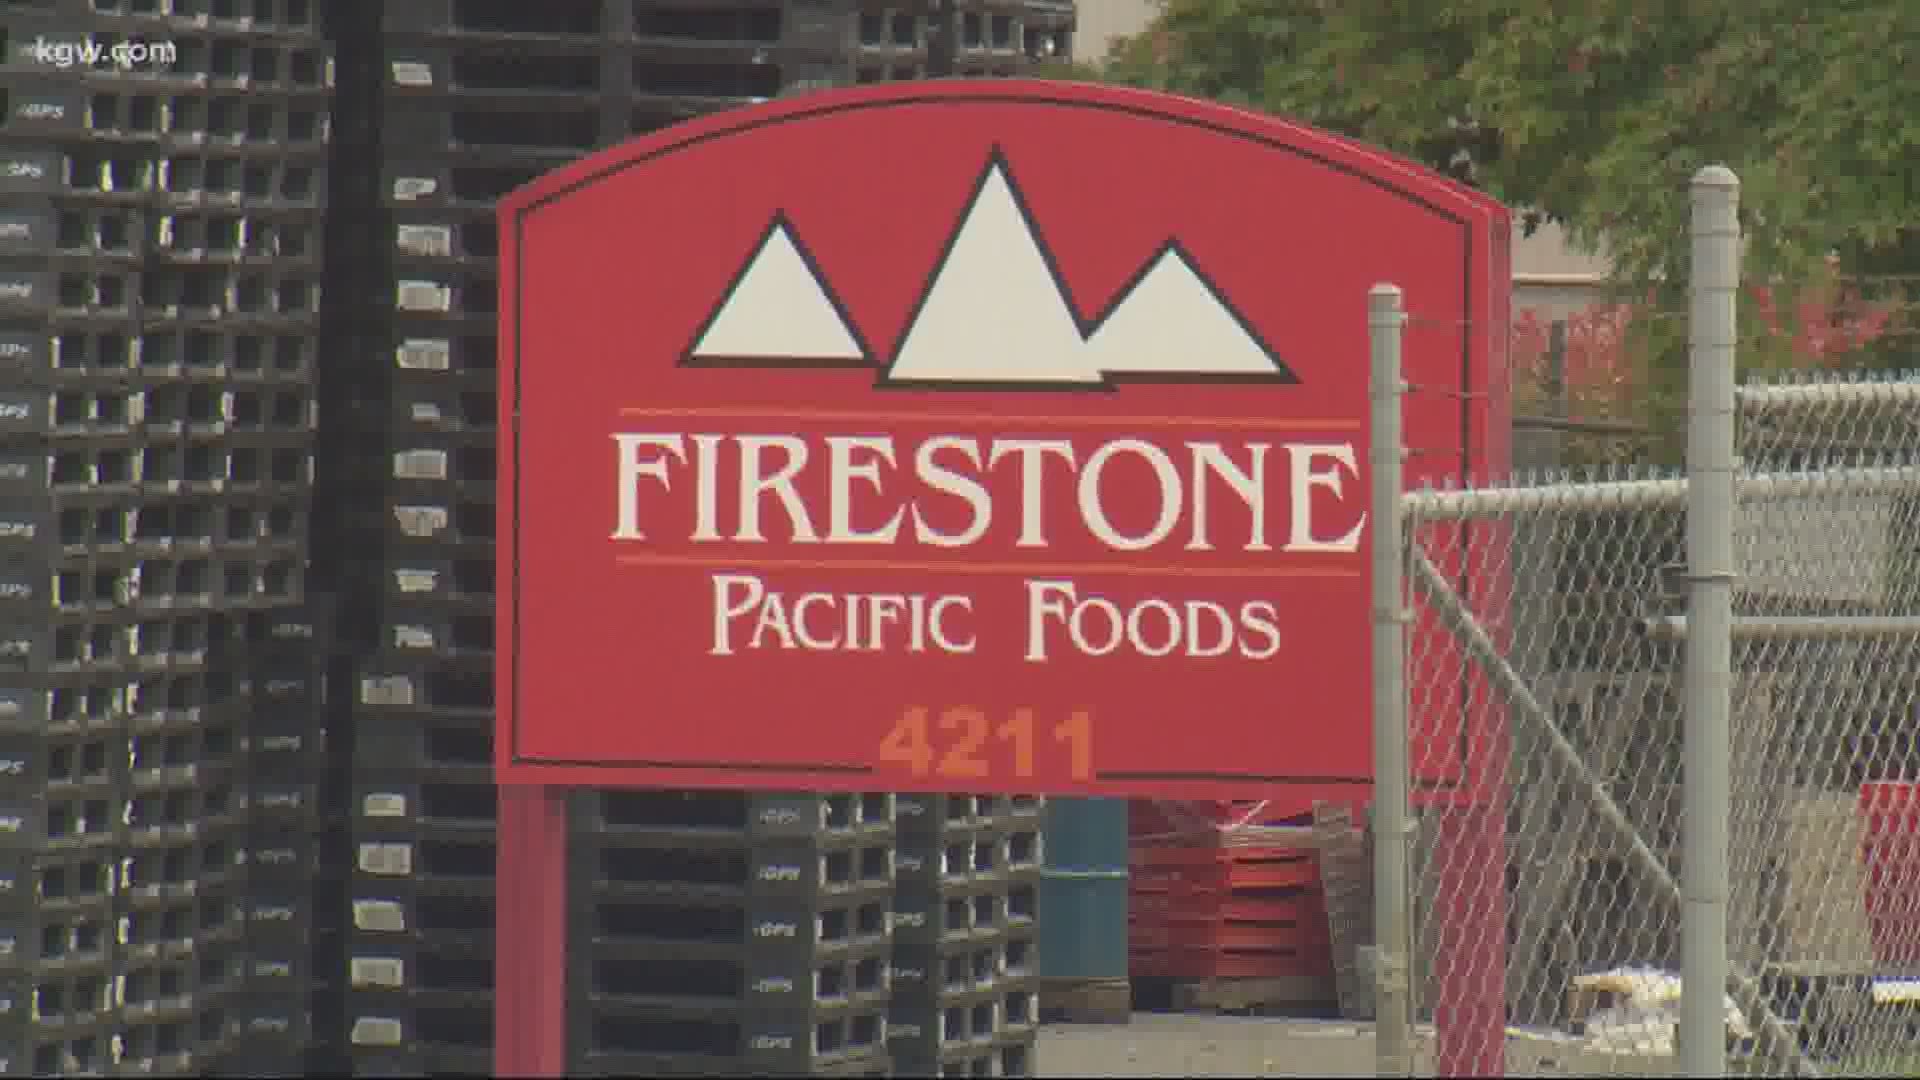 The outbreak at Firestone Pacific Foods may be the Portland area’s biggest workplace outbreak outside of health care sector, The Oregonian/OregonLive reported.